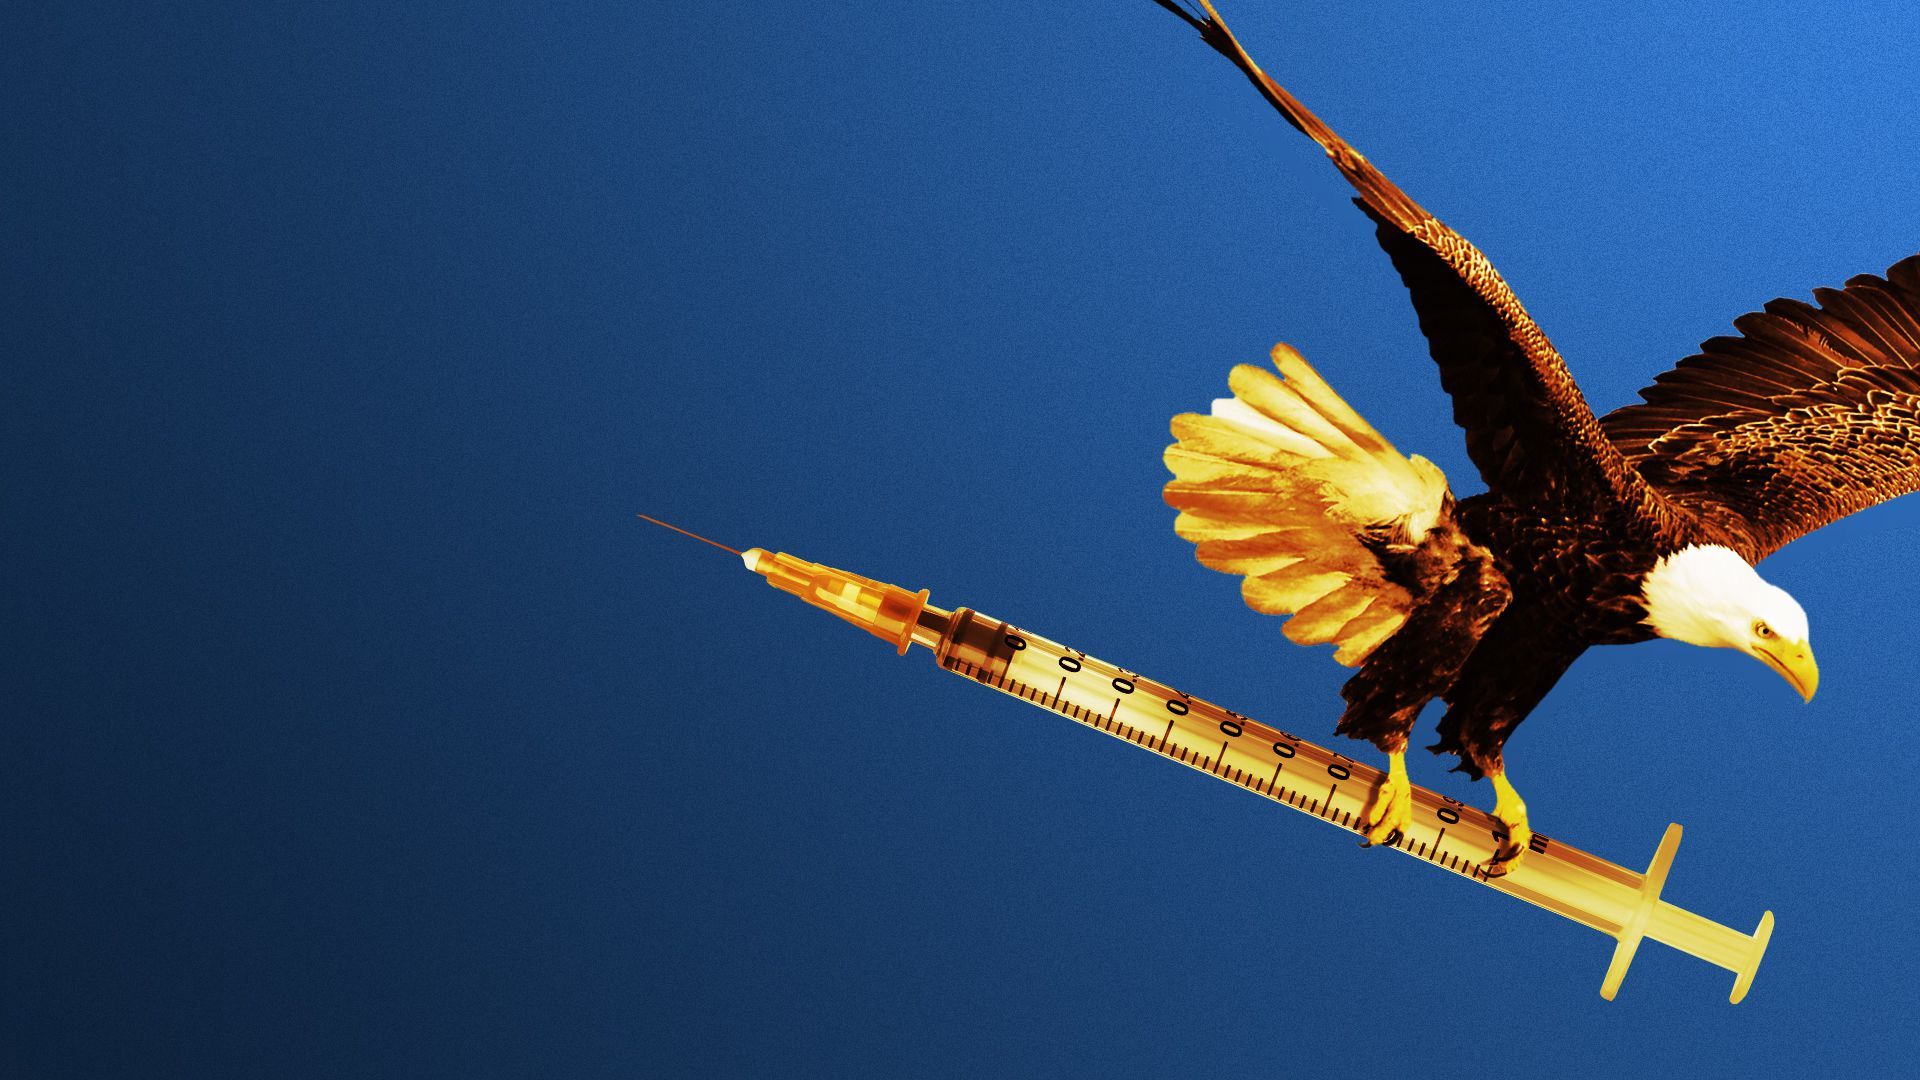 Illustration of a bald eagle clutching a syringe in its talons.